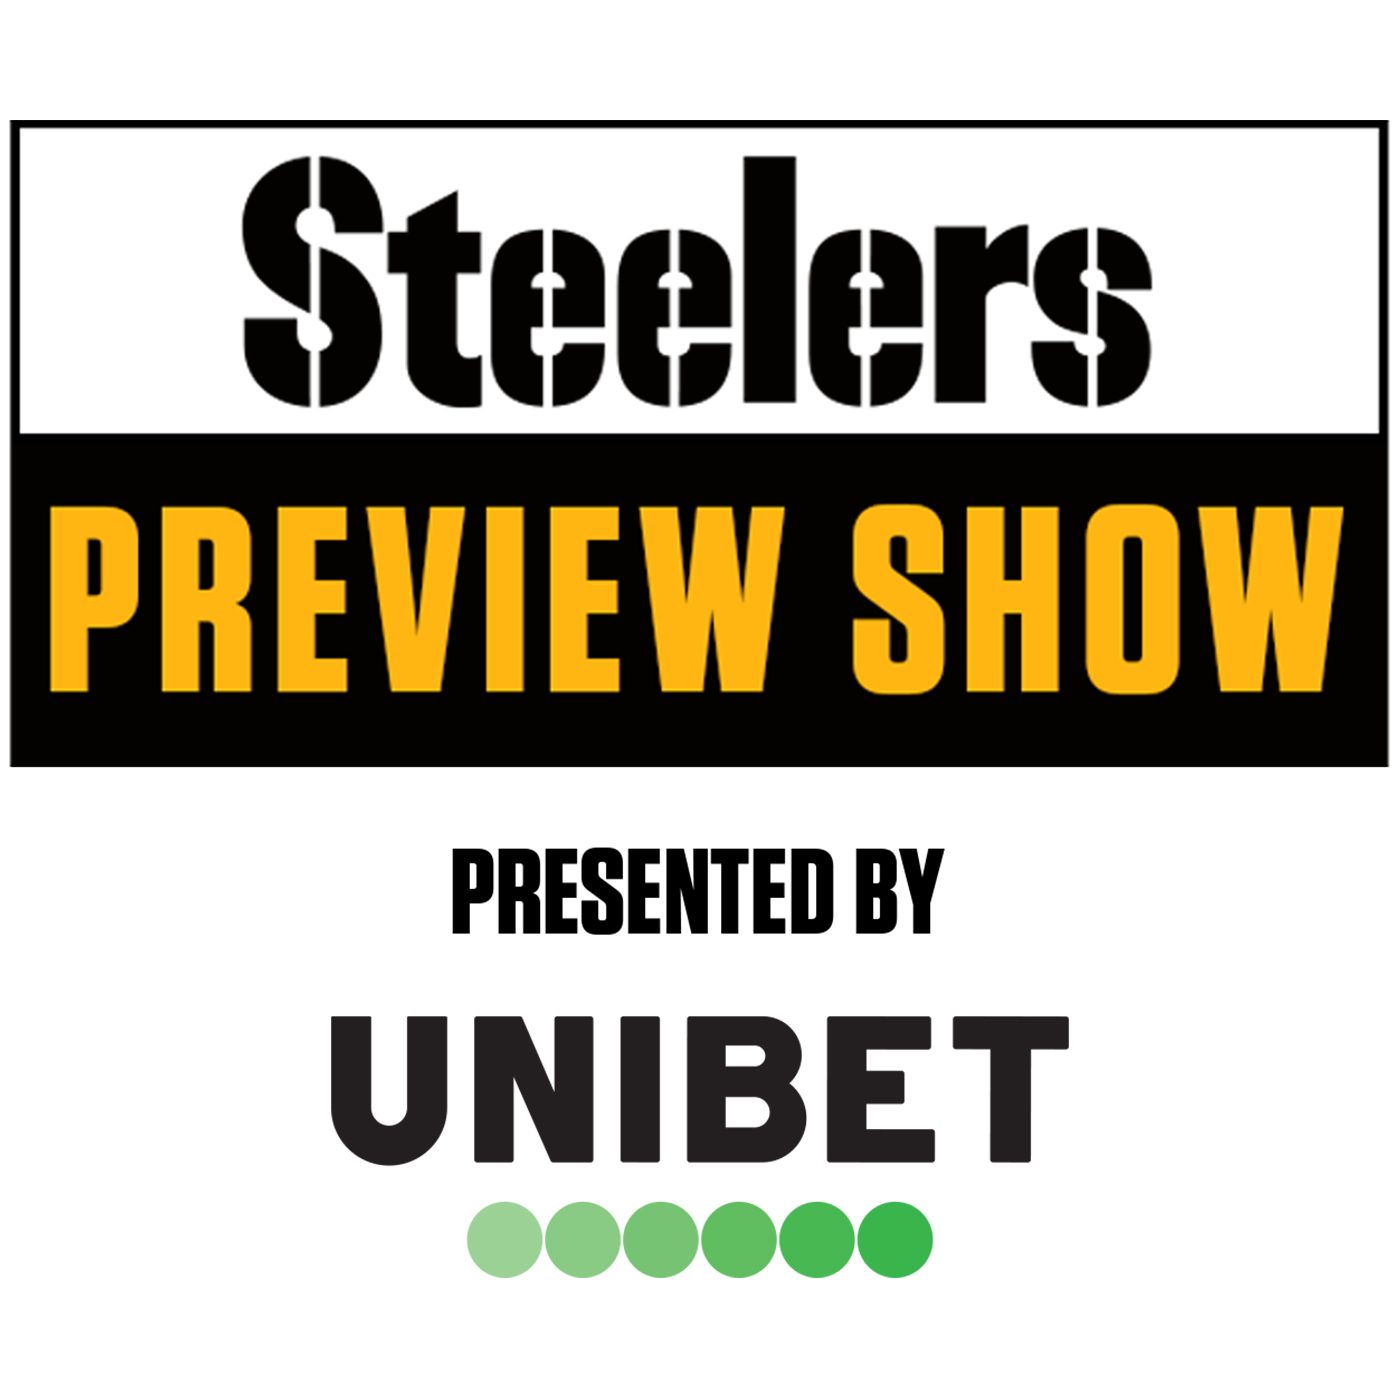 Seahawks Steelers Preview